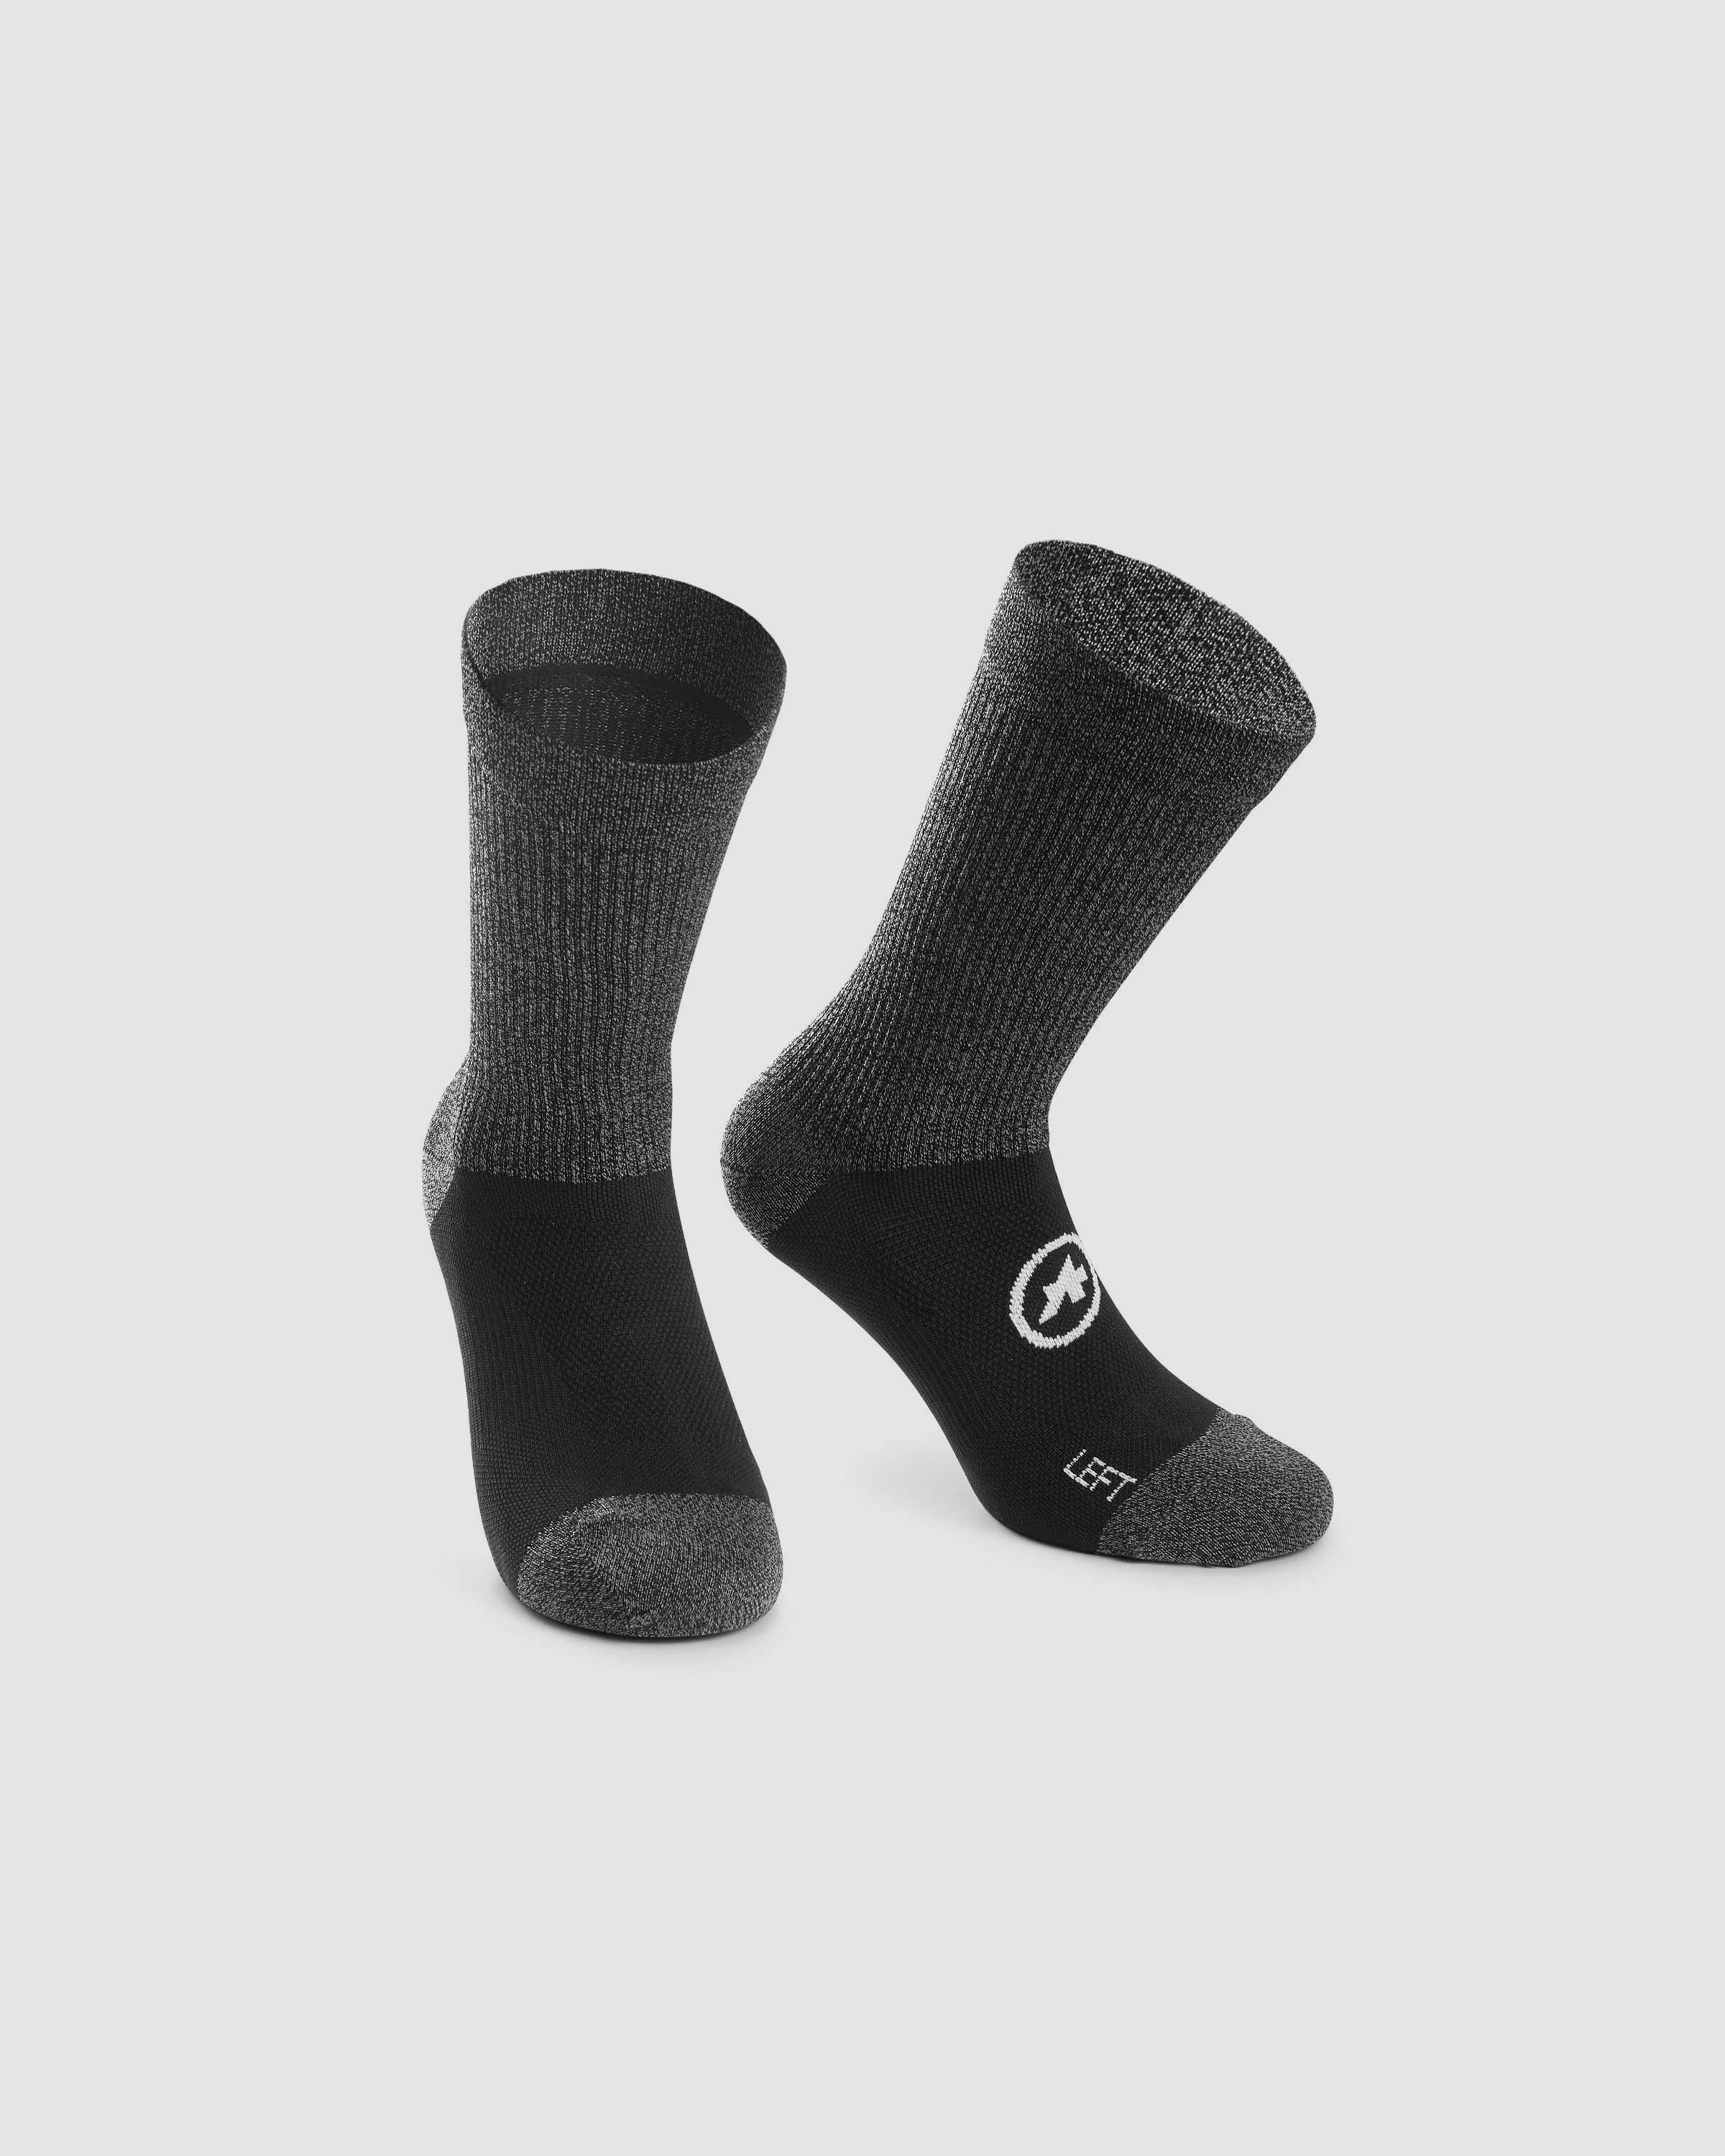 TRAIL Socks - ASSOS Of Switzerland - Official Outlet